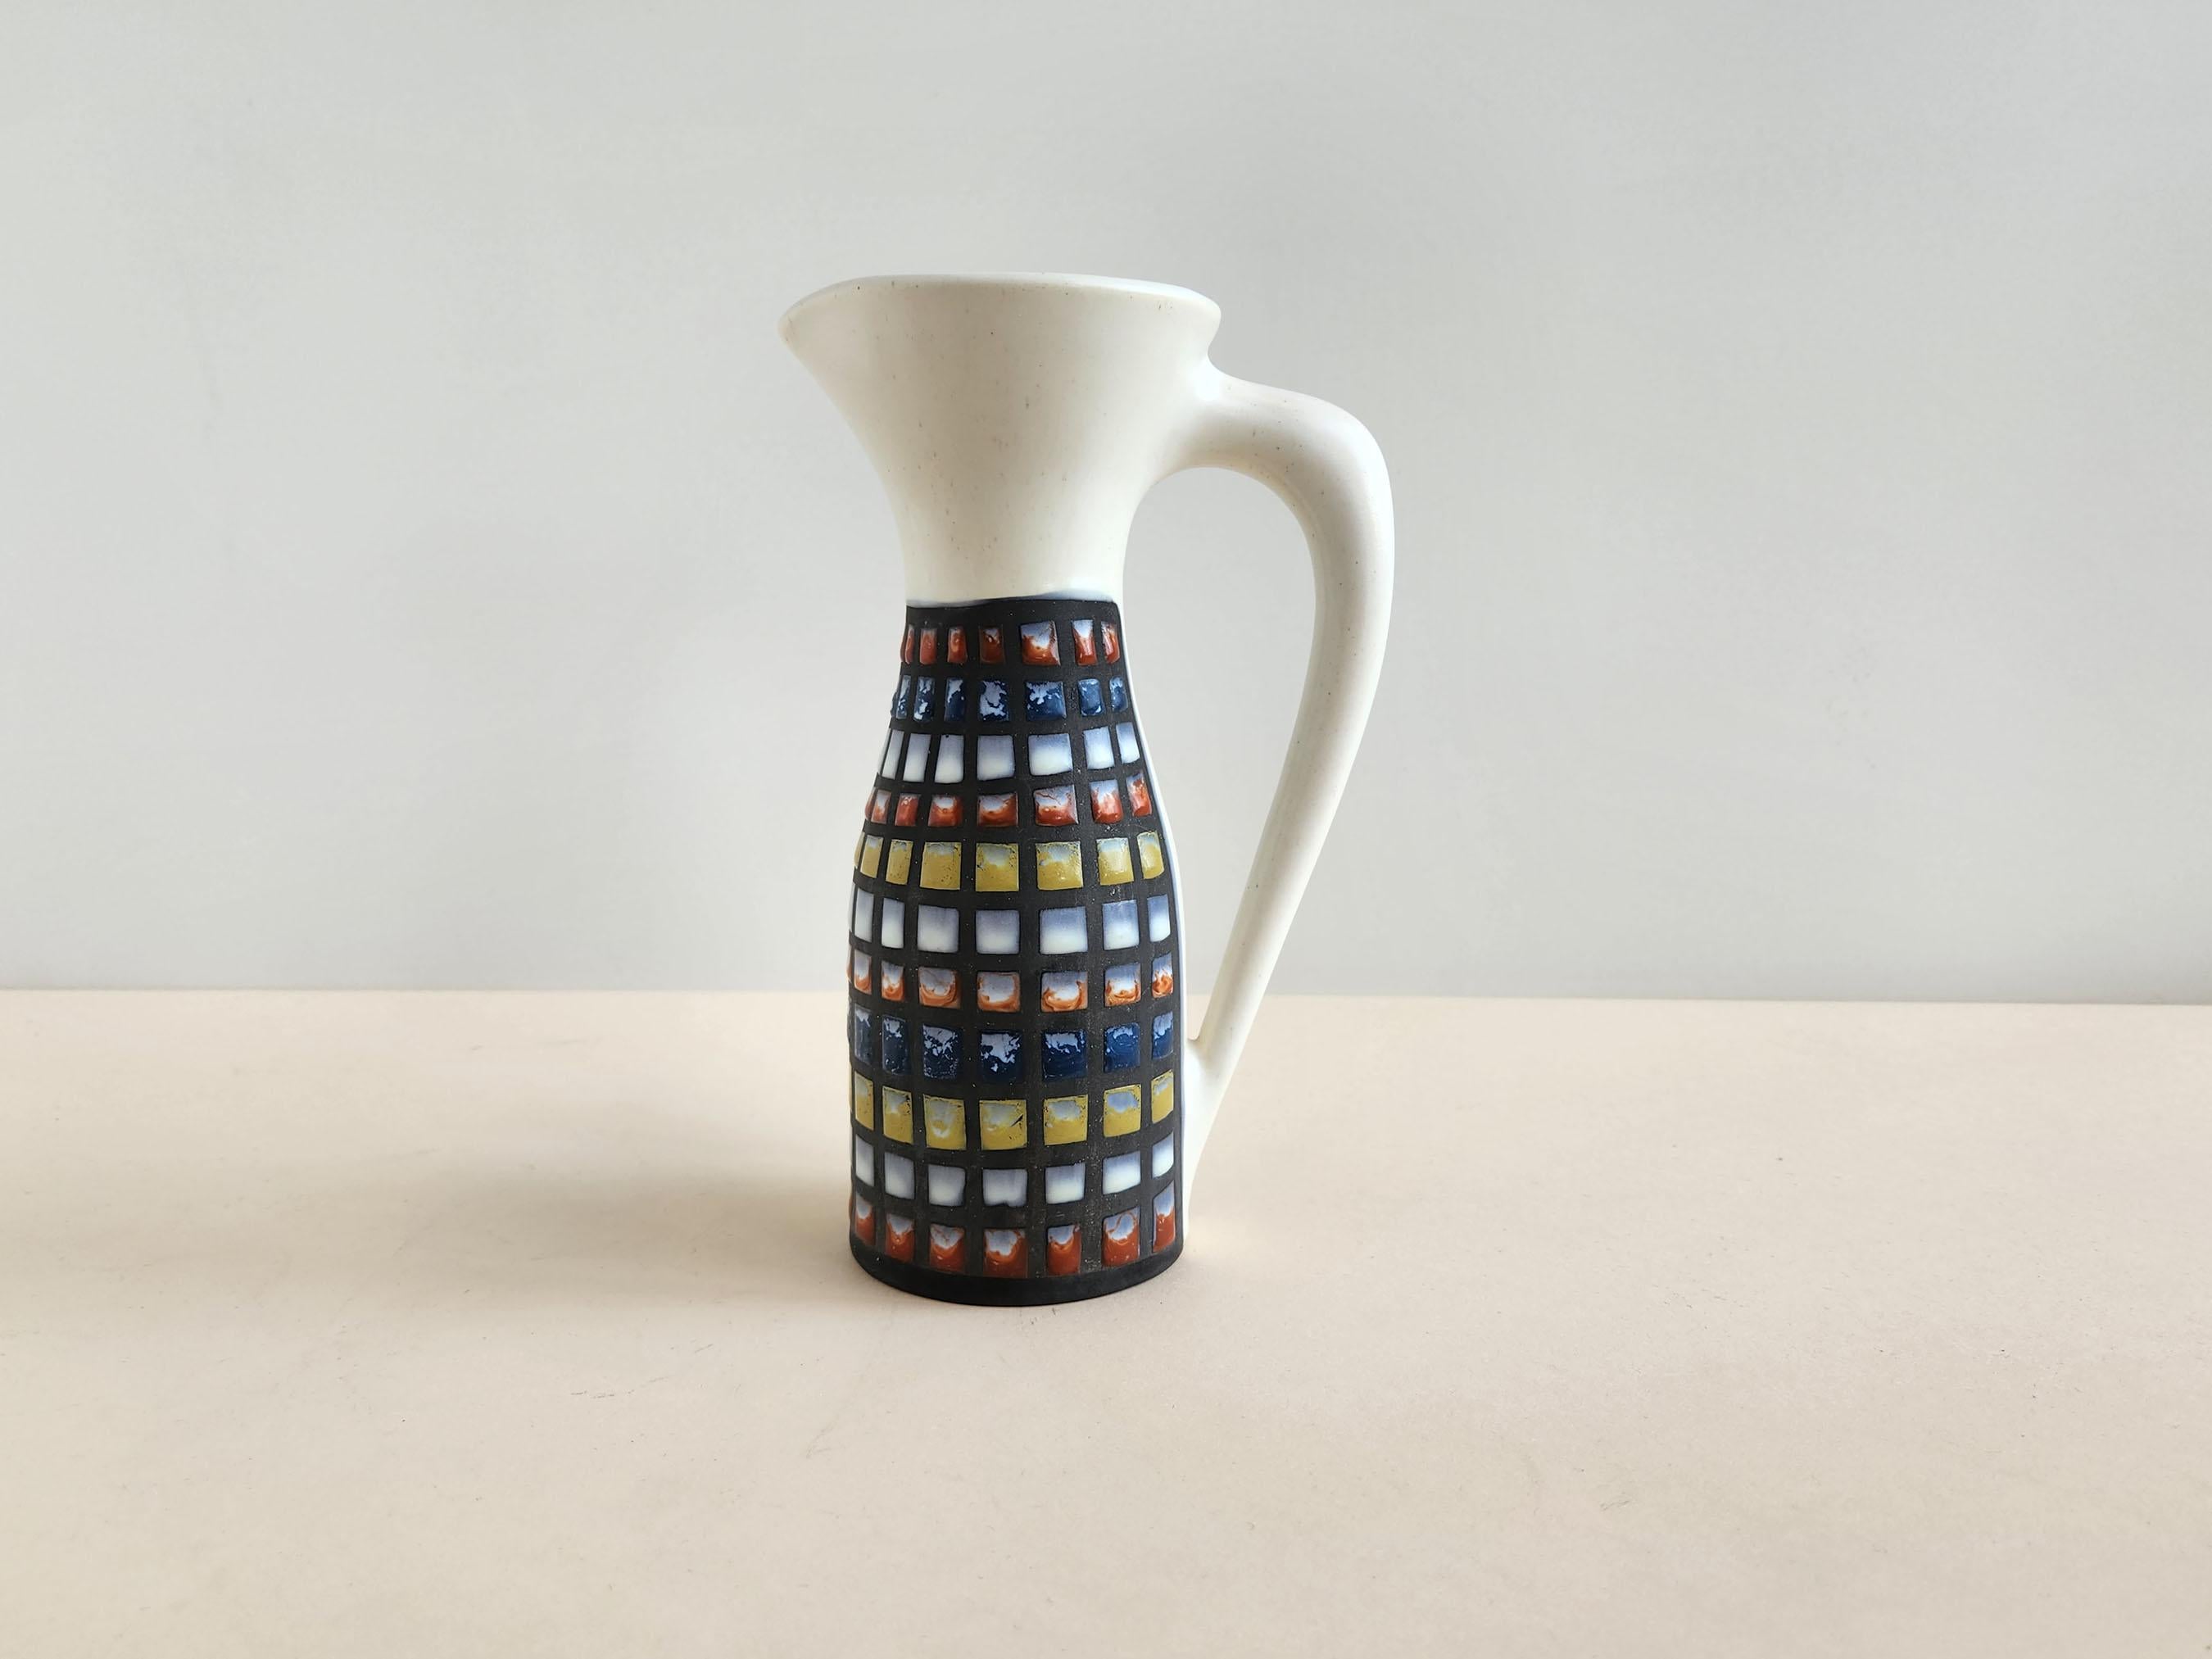 Vintage ceramic decorative pitcher signed by Roger Capron - Vallauris, France

Roger Capron was in influential French ceramicist, known for his tiled tables and his use of recurring motifs such as stylized branches and geometrical suns.   He was